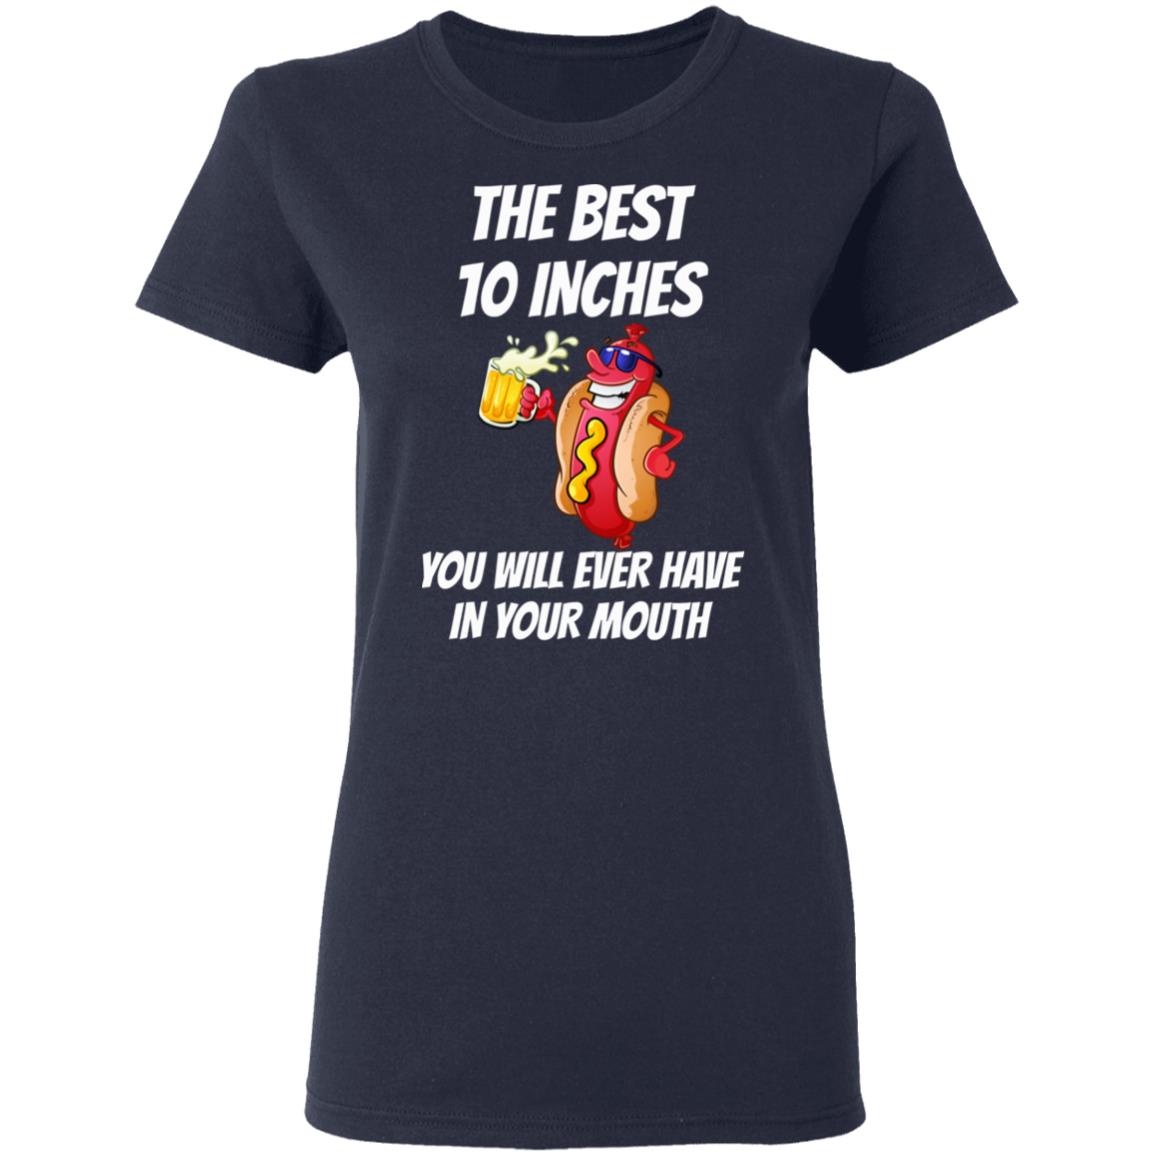 10 T-Shirts That Will Make You Look Like You've Been Hitting the